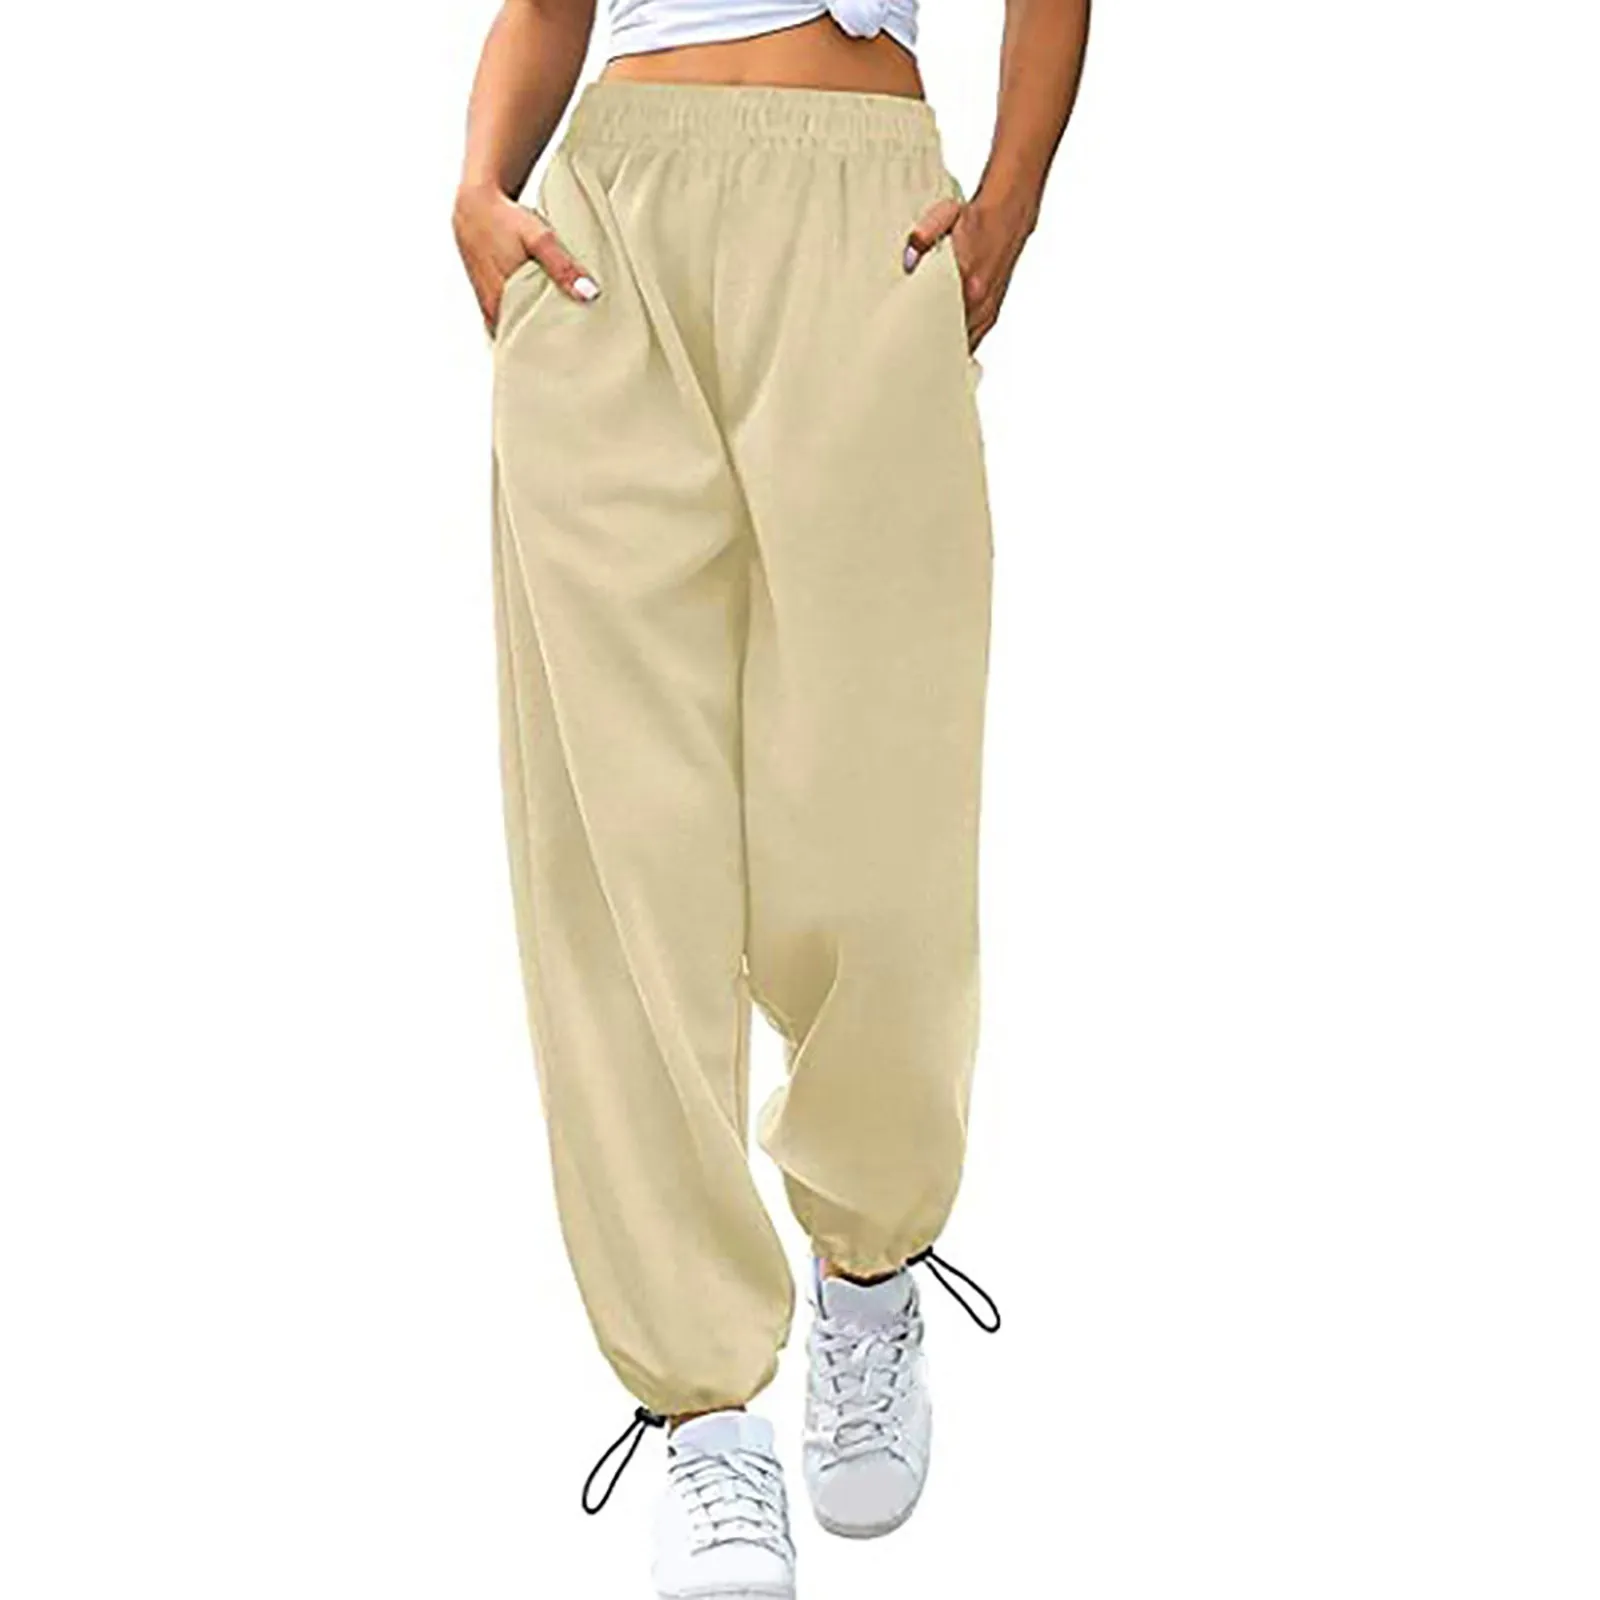 

Women's Loose Comfortable Sports Joggers Pants Casual Pockets Elastic Waist Trousers Solid Colours Wide Leg Drawstring Pants